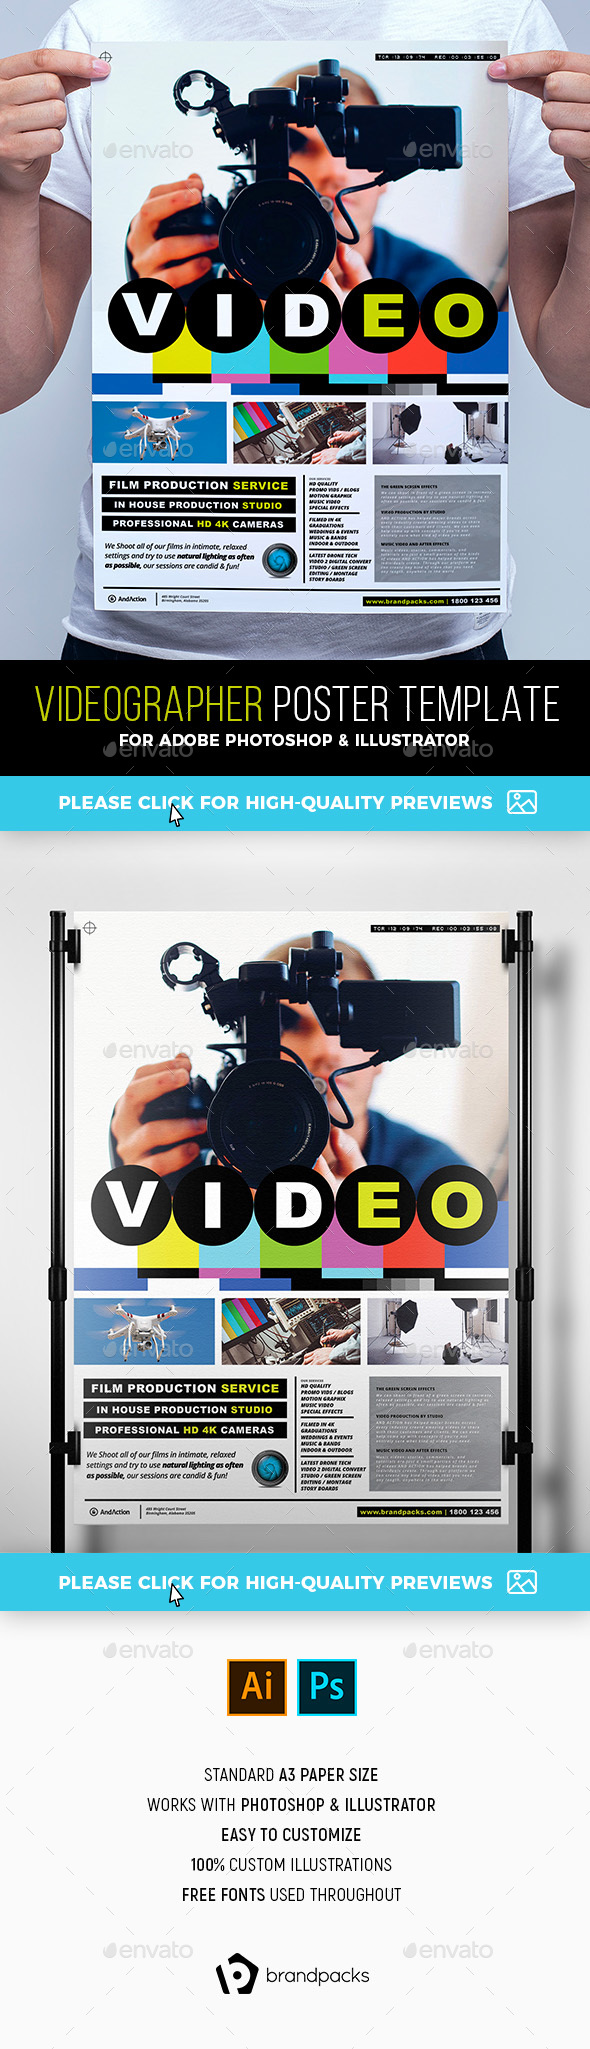 Videographer Poster Template